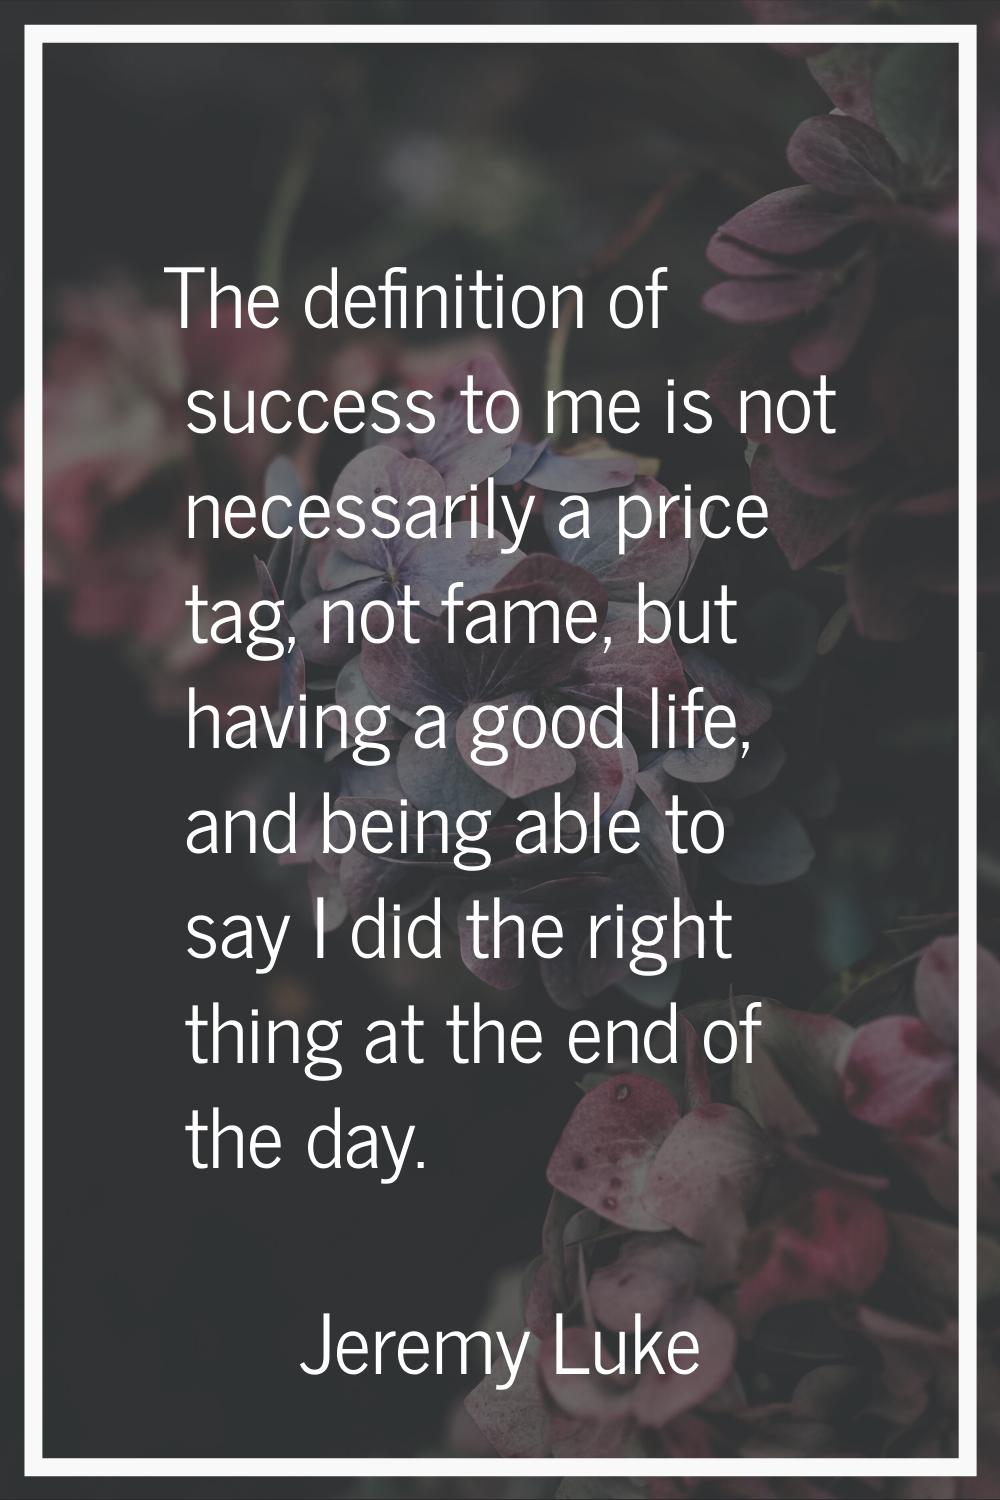 The definition of success to me is not necessarily a price tag, not fame, but having a good life, a